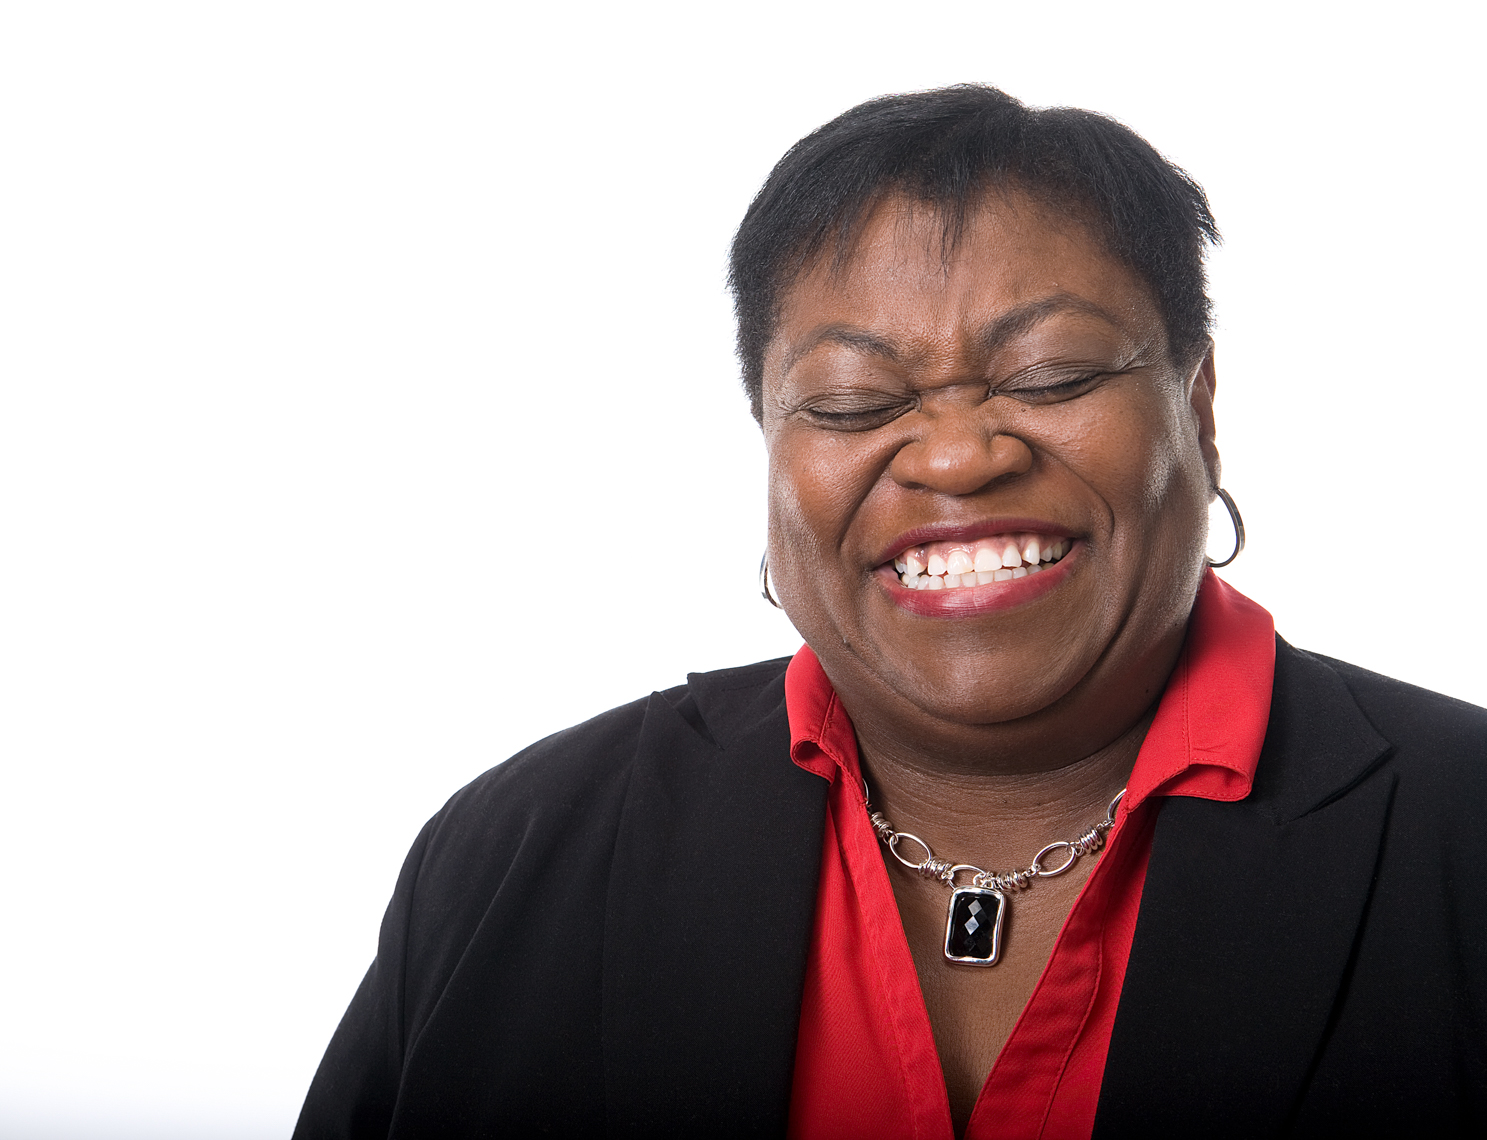 Laughing, giggling, happy, mature woman, African-American, joy, smile, diversity, portrait, activism, immigrant rights, mission, United Methodist Women, human rights, Nashville portrait photographer